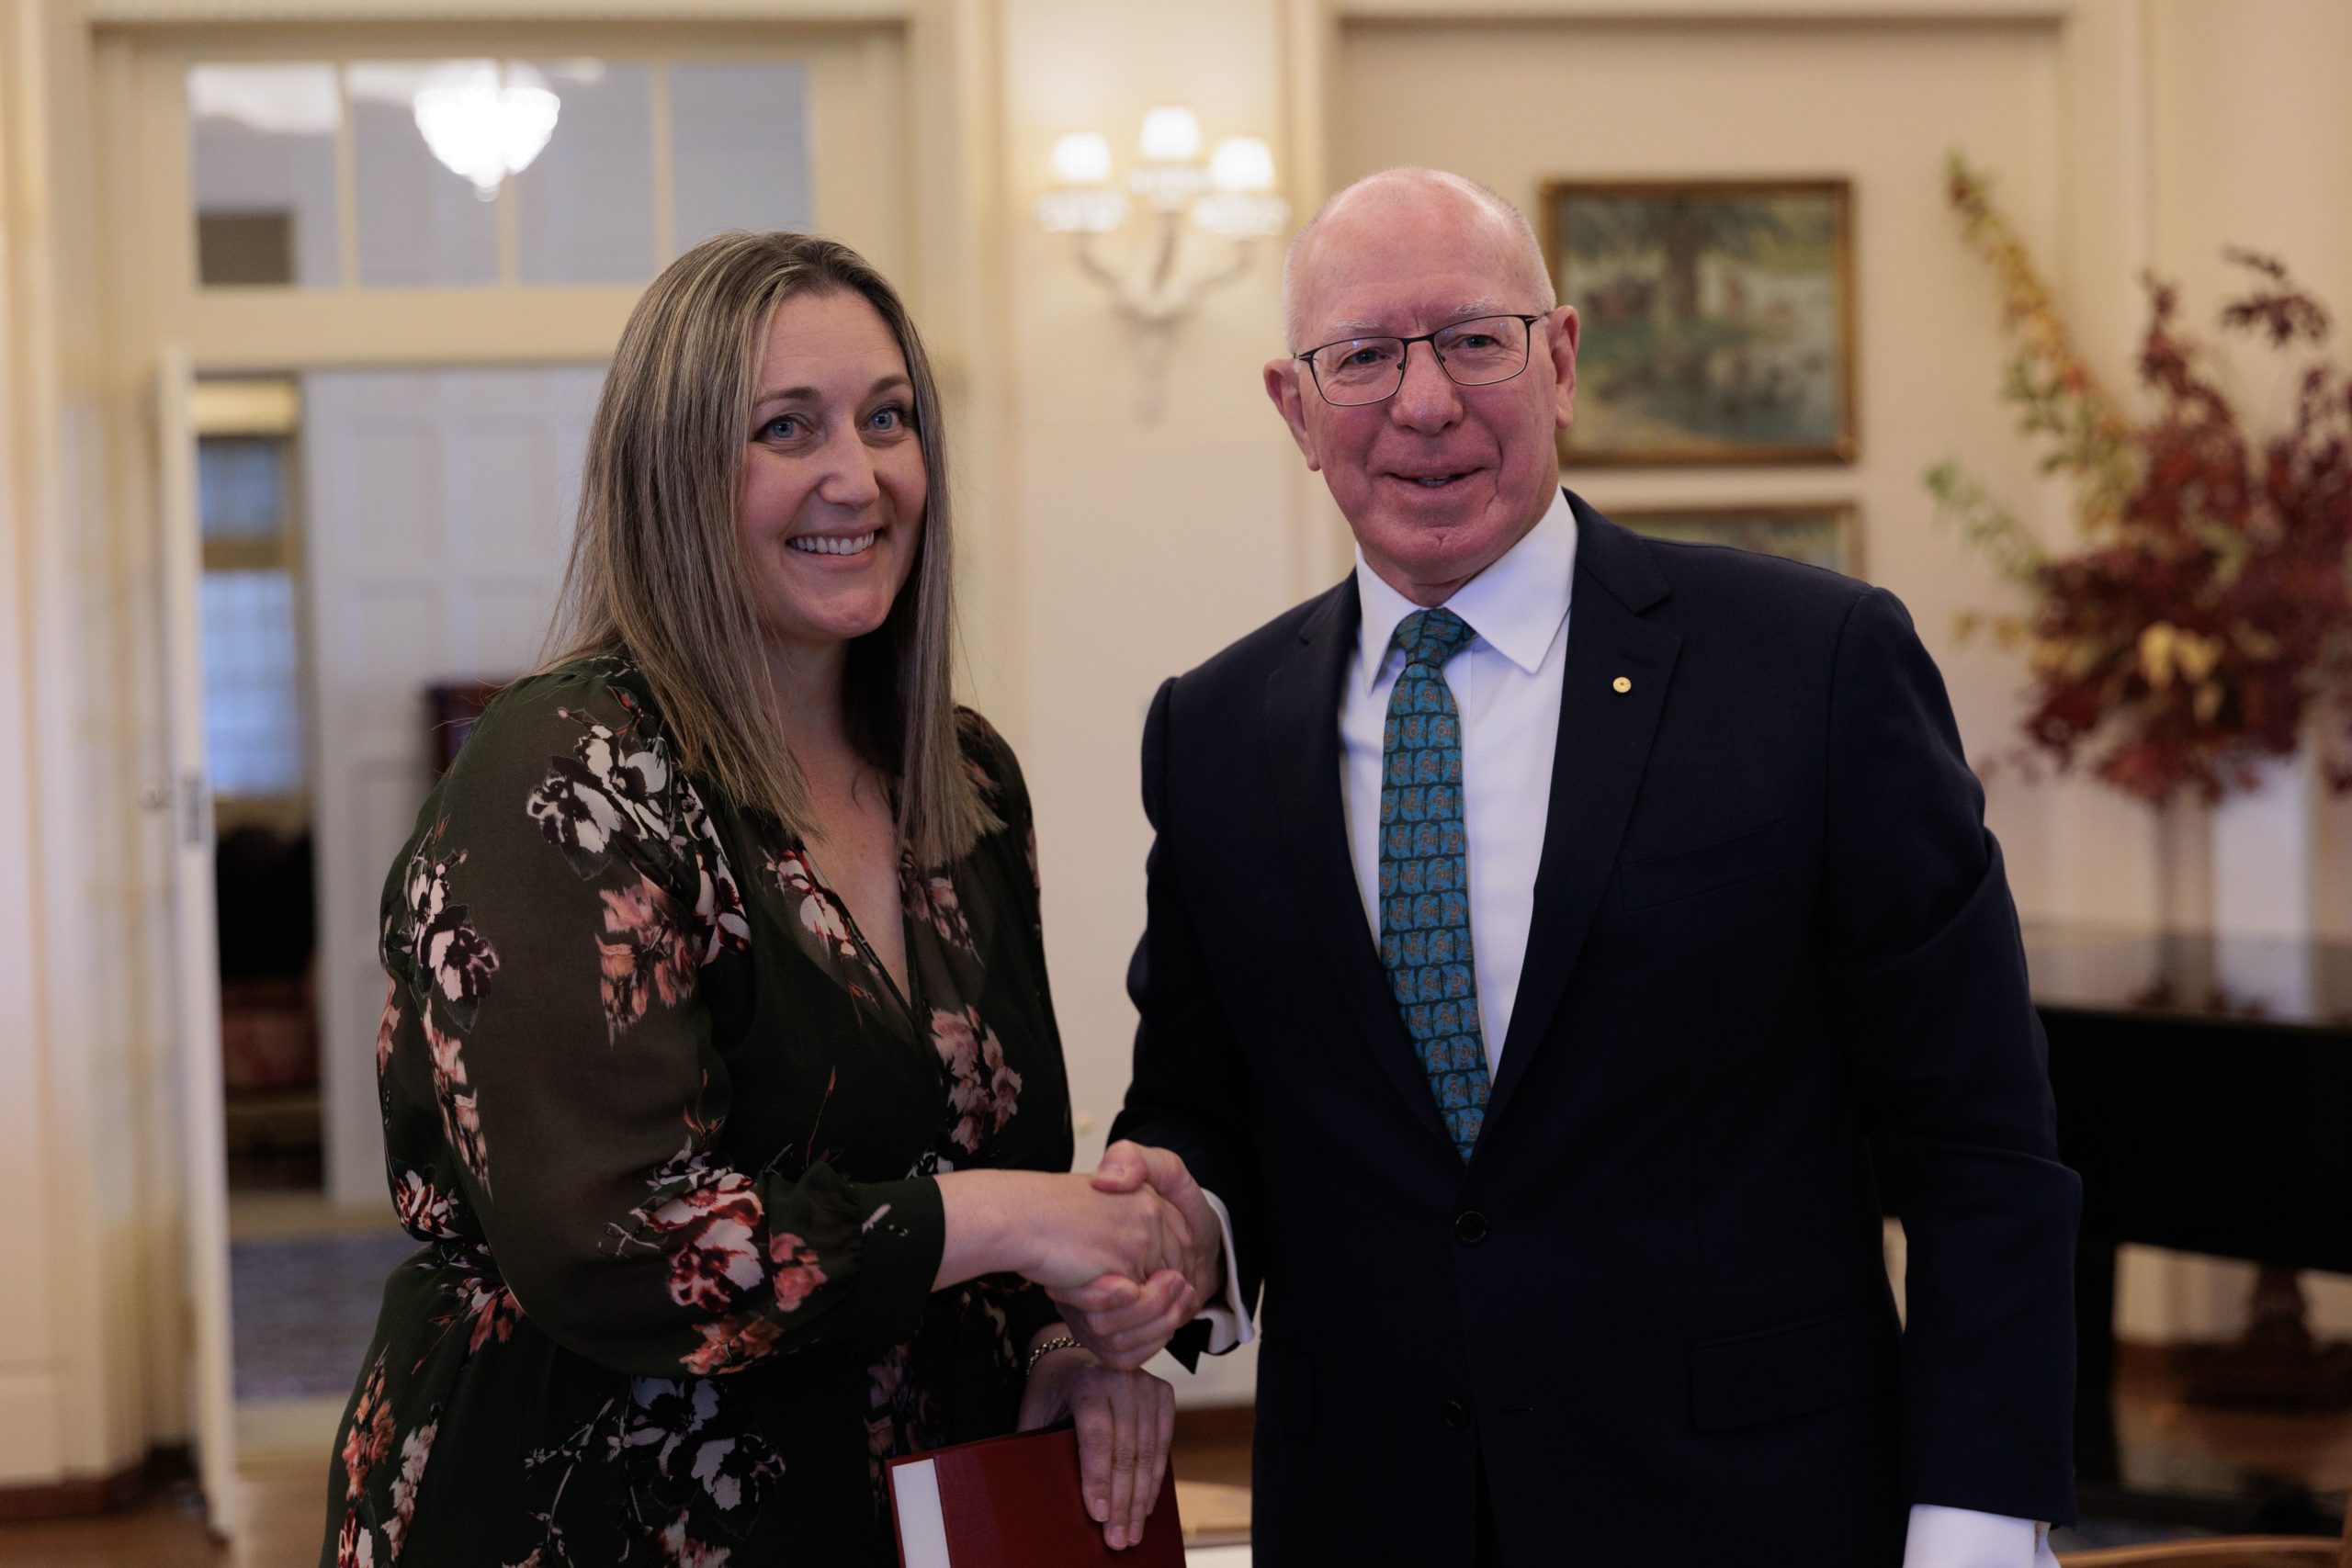 McBride sworn in as Assistant Minister - Central Coast News